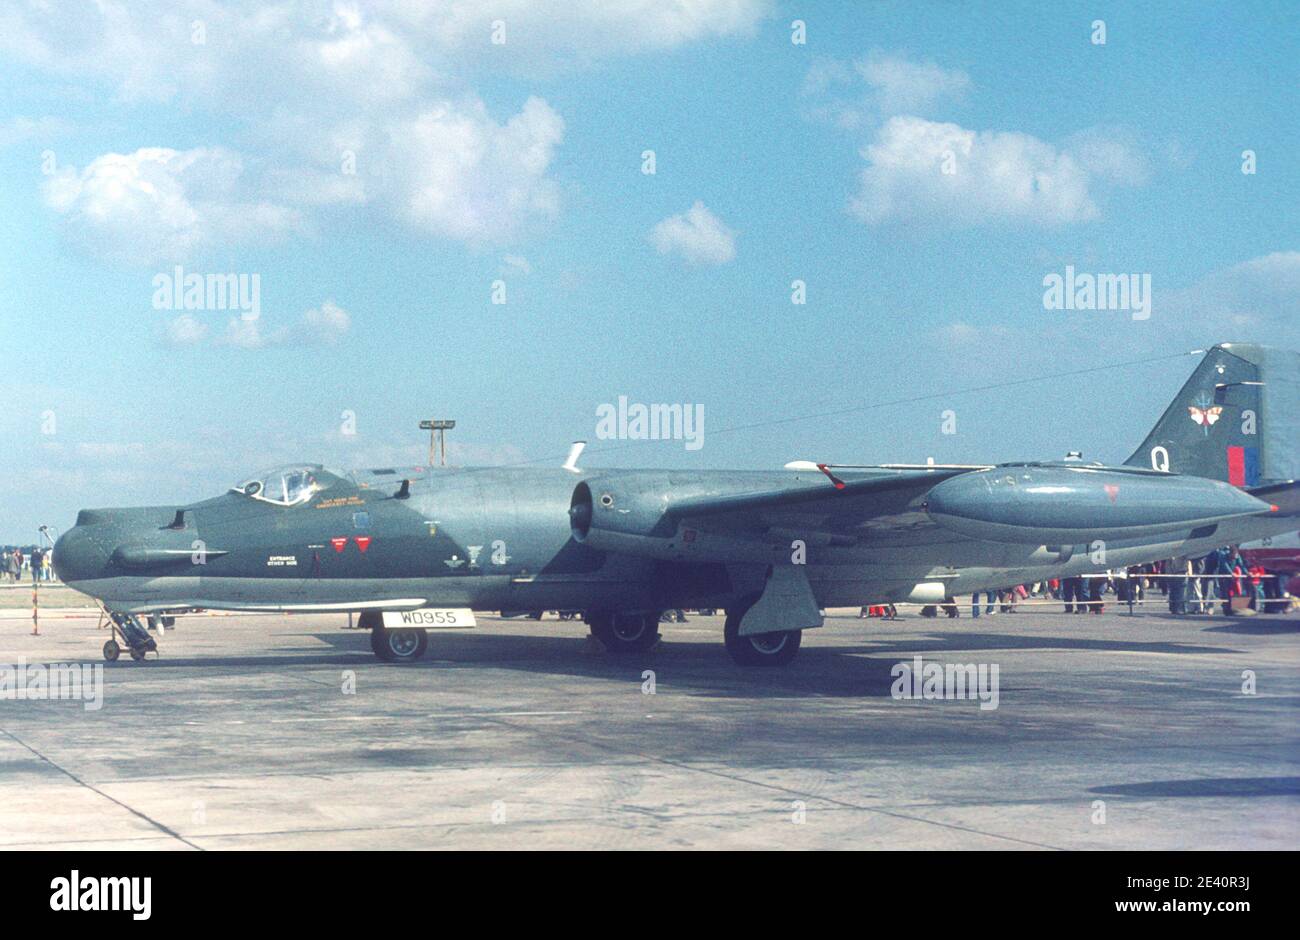 1975 RAF Finningley air display airshow 1975. An English Electric Canberra WD955 on static display. It is designated as English Electric Canberra T17A, WD955 / 71037, Royal Air Force .The photo is taken 20 Sep 1975 at an air show at  RAF Finningley airfield Doncaster South Yorkshire England UK GB Europe Stock Photo